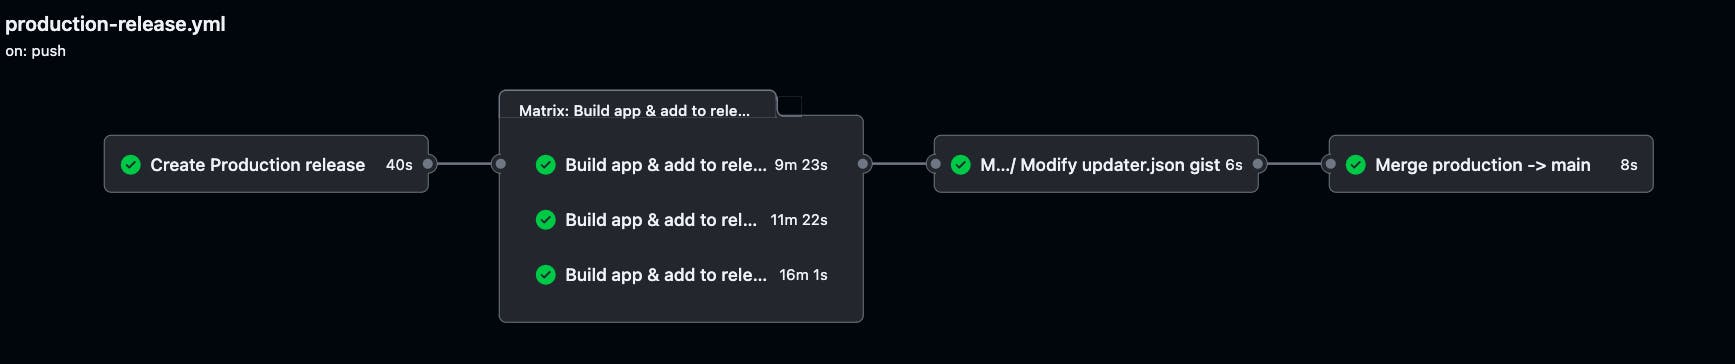 example-workflow-run.png